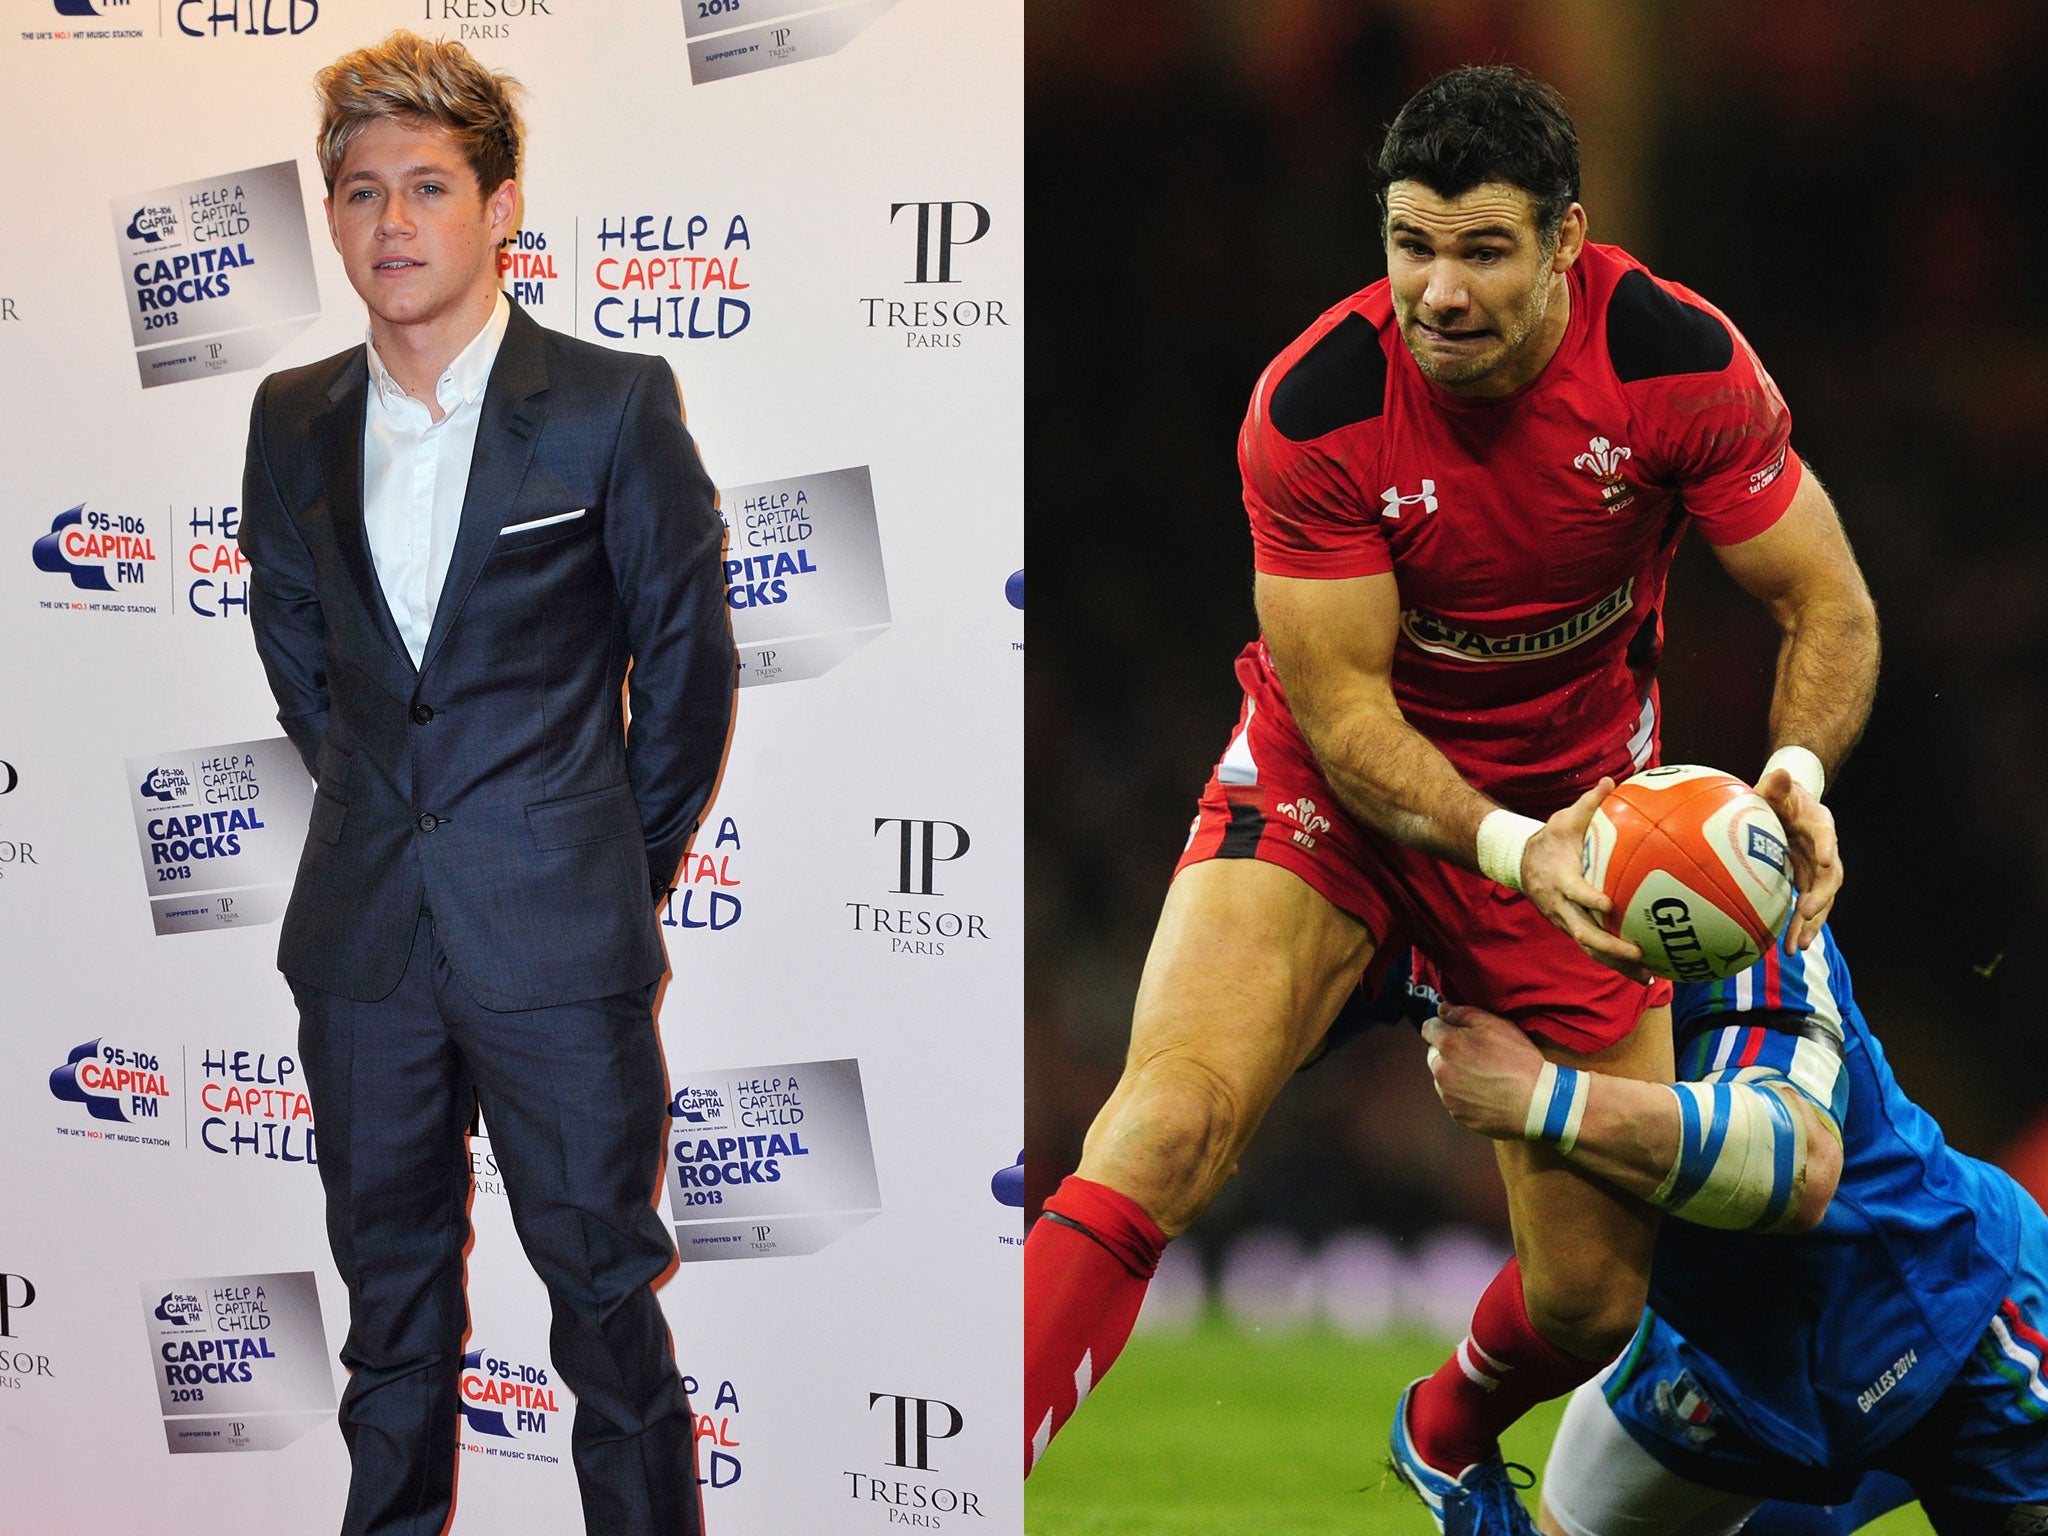 Niall Horan and Mike Phillips